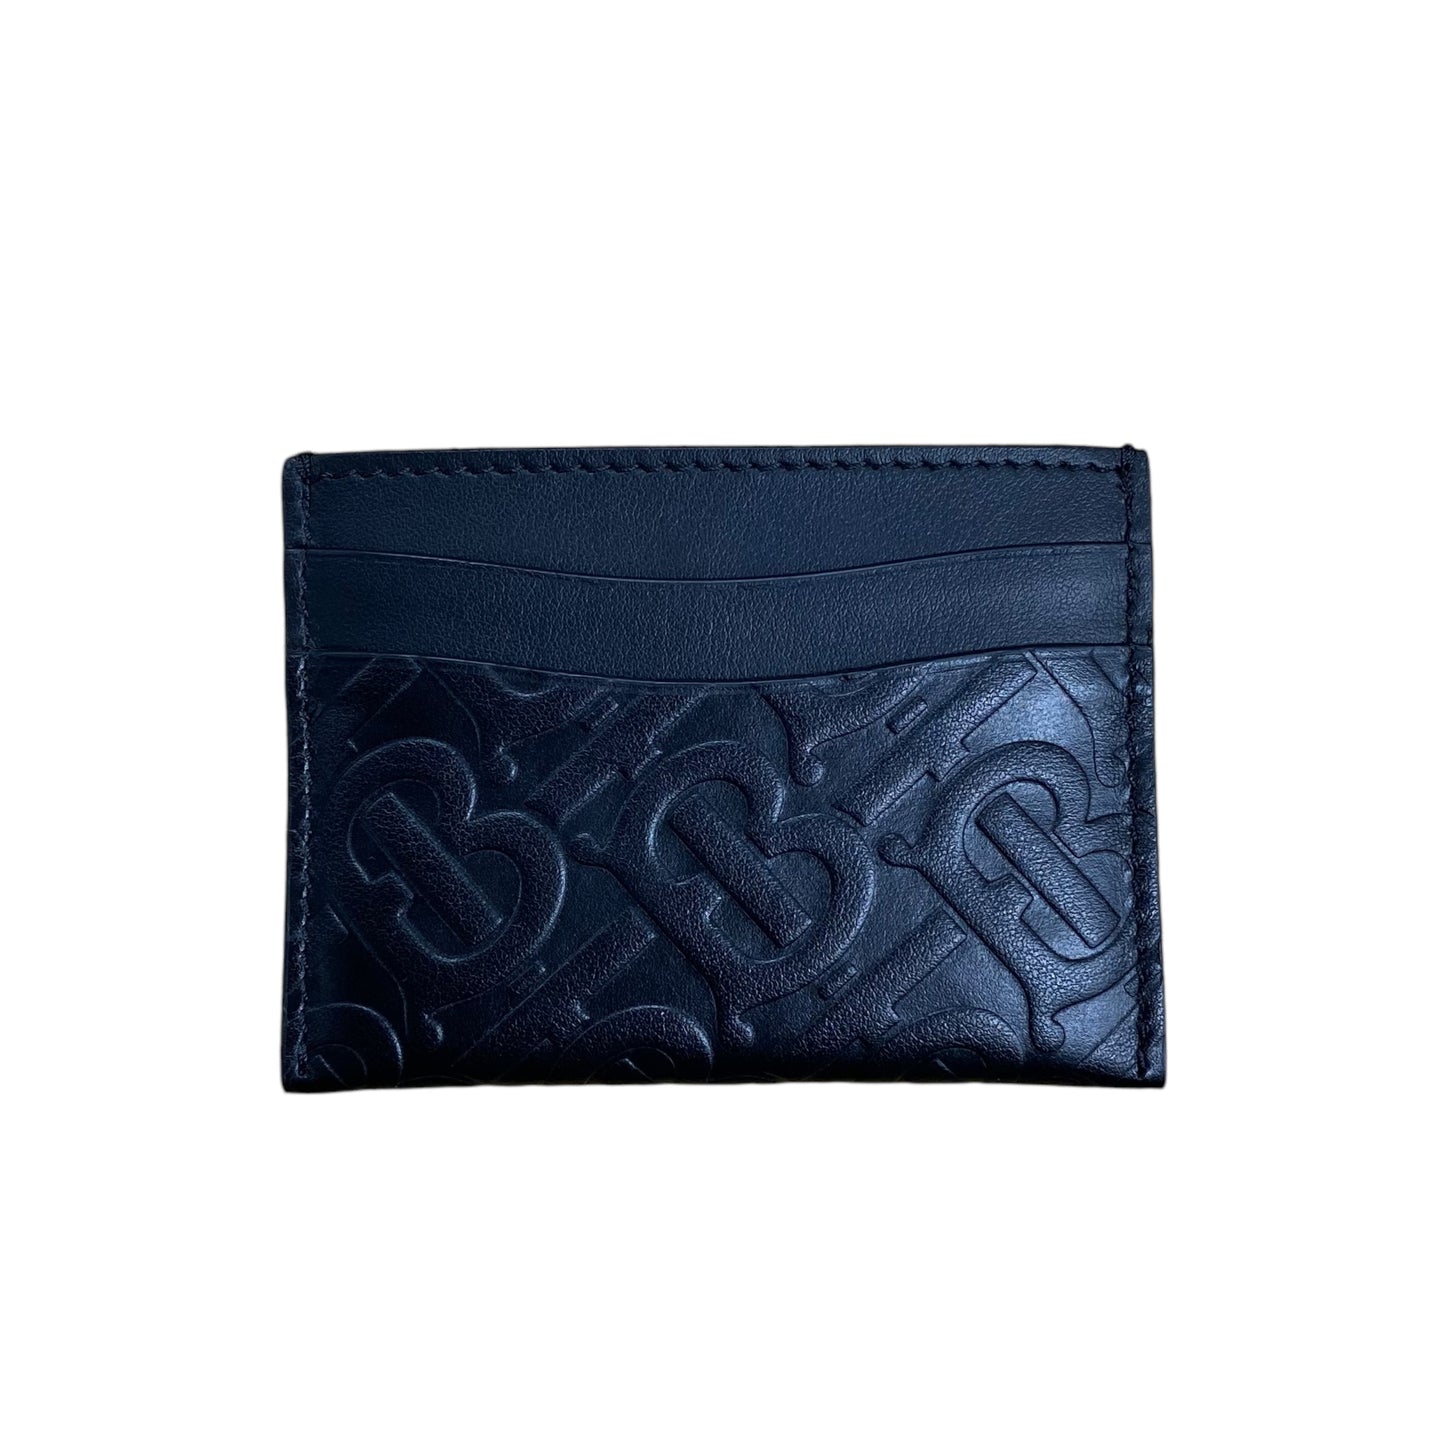 Wallet Luxury Designer By Burberry  Size: Small